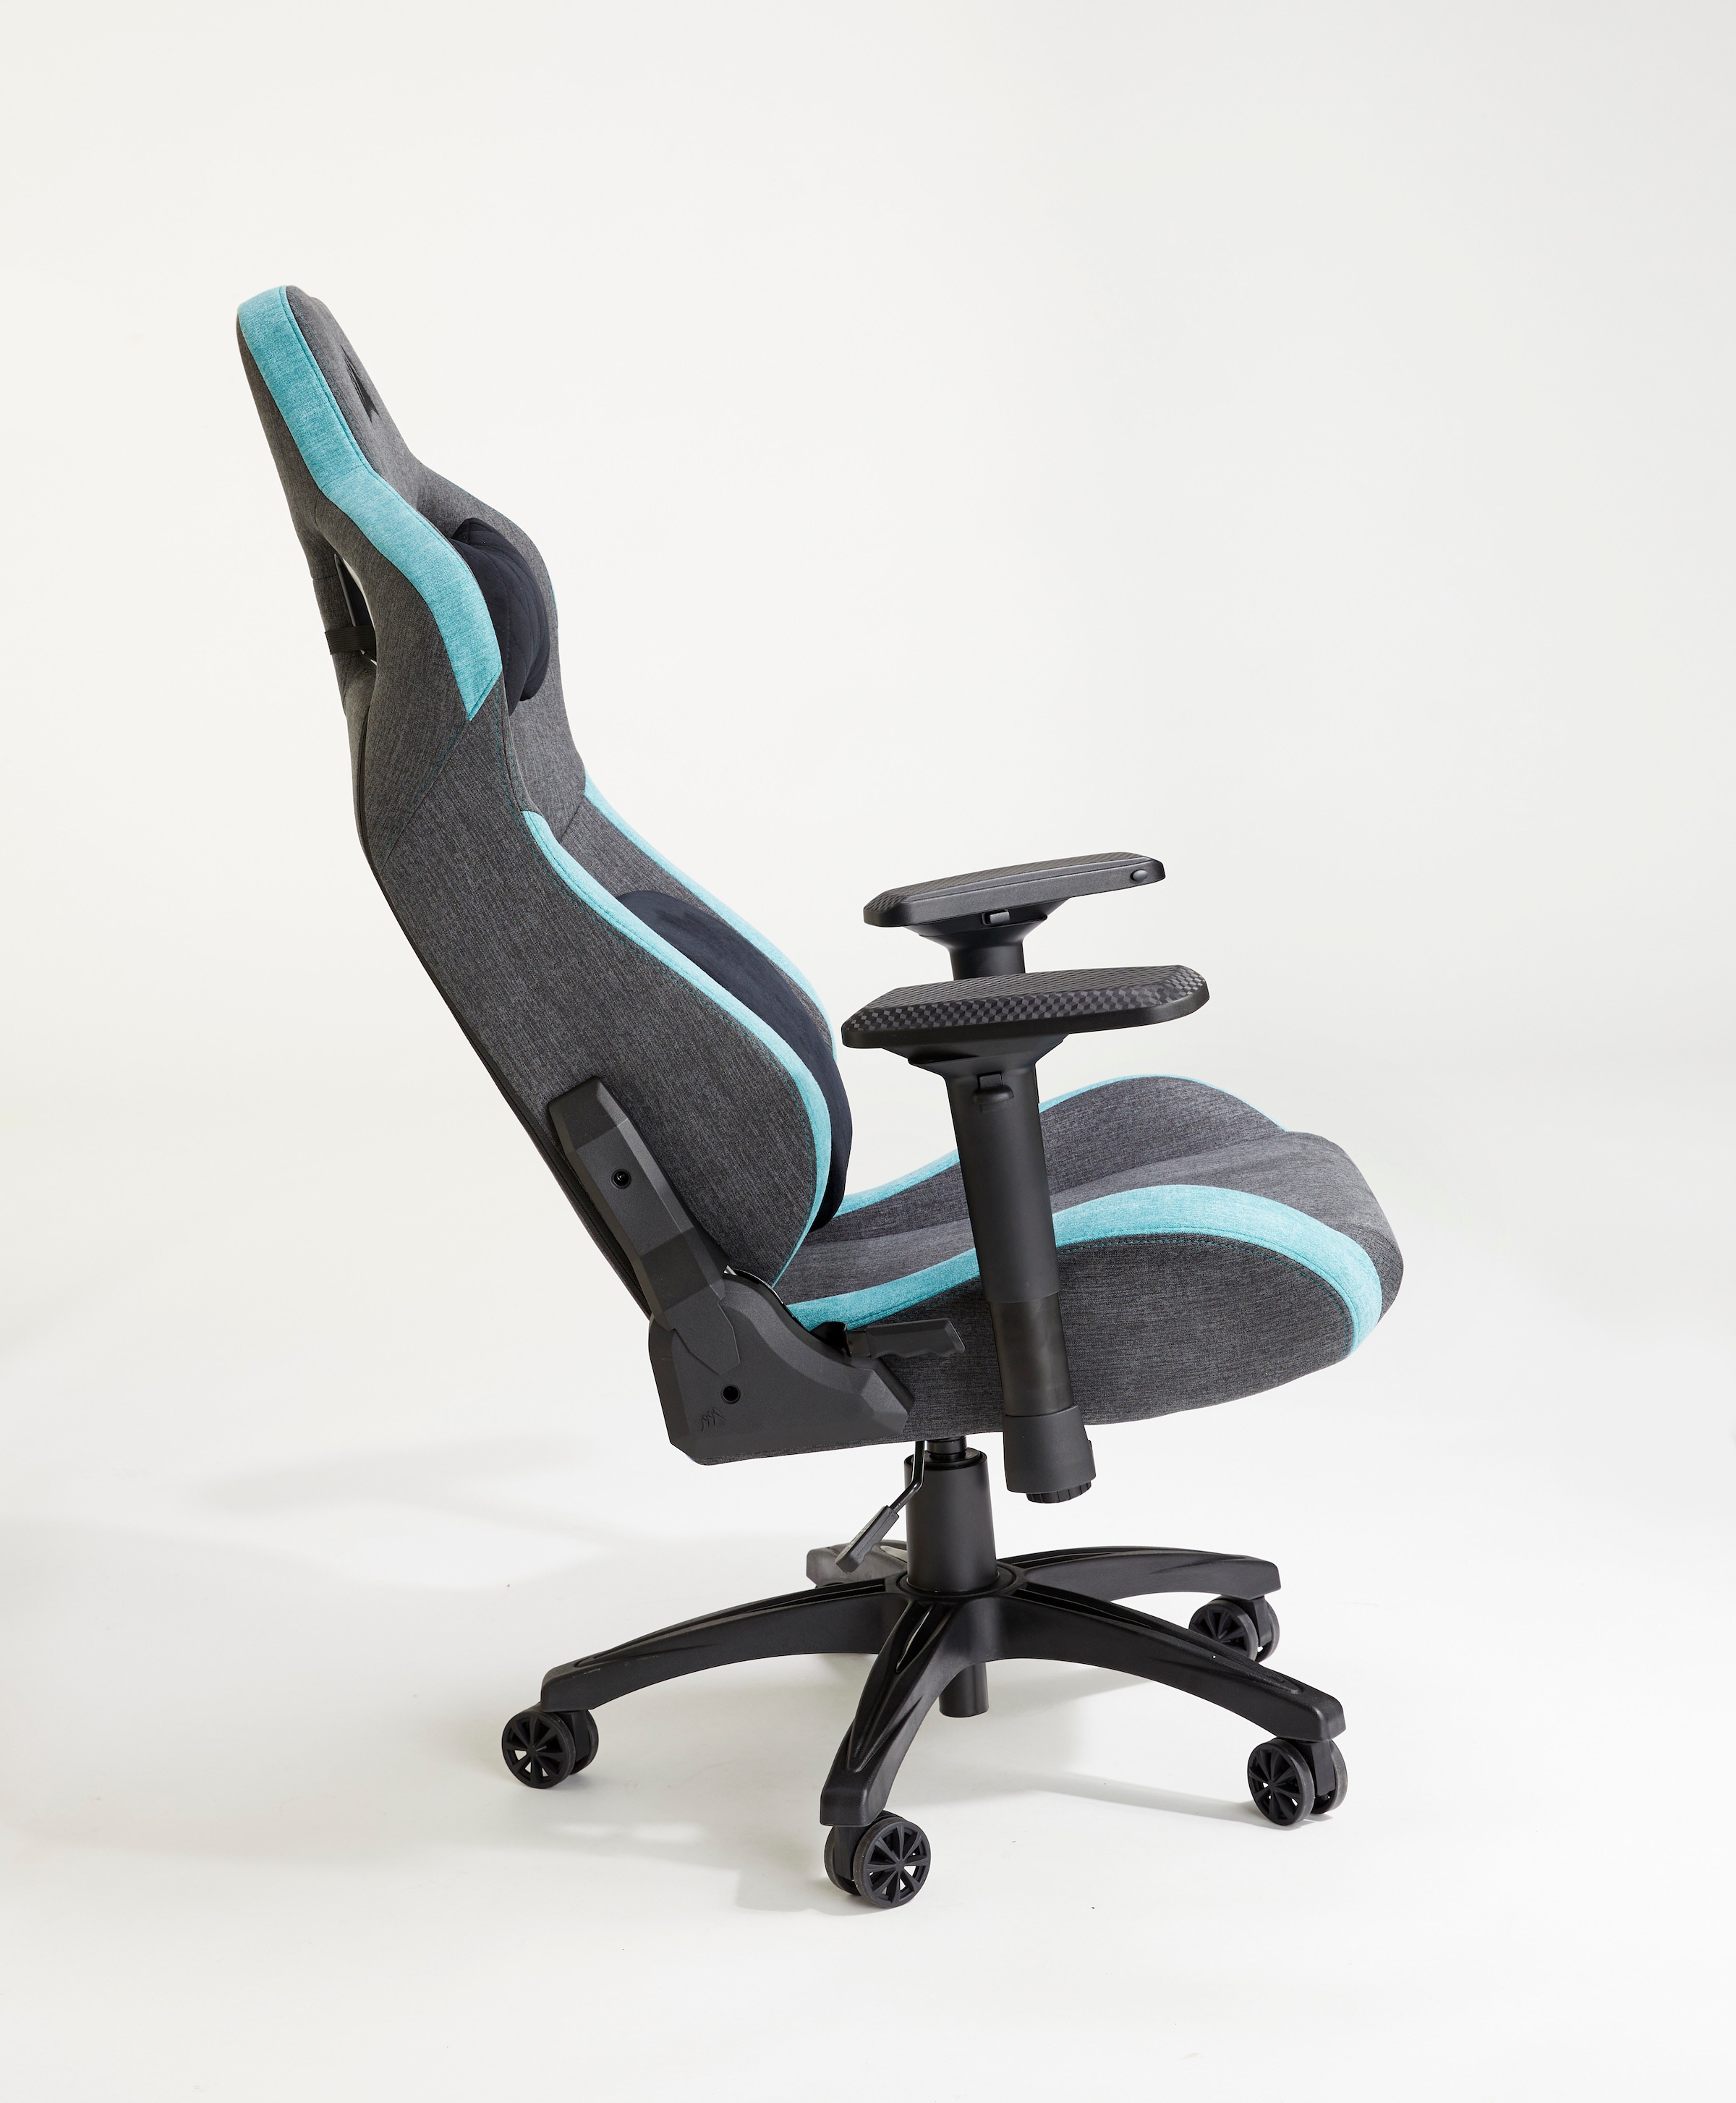 Corsair Gaming Chair »T3 Rush Fabric Gaming Chair«, Racing-Inspired Design, Soft Fabric Exterior